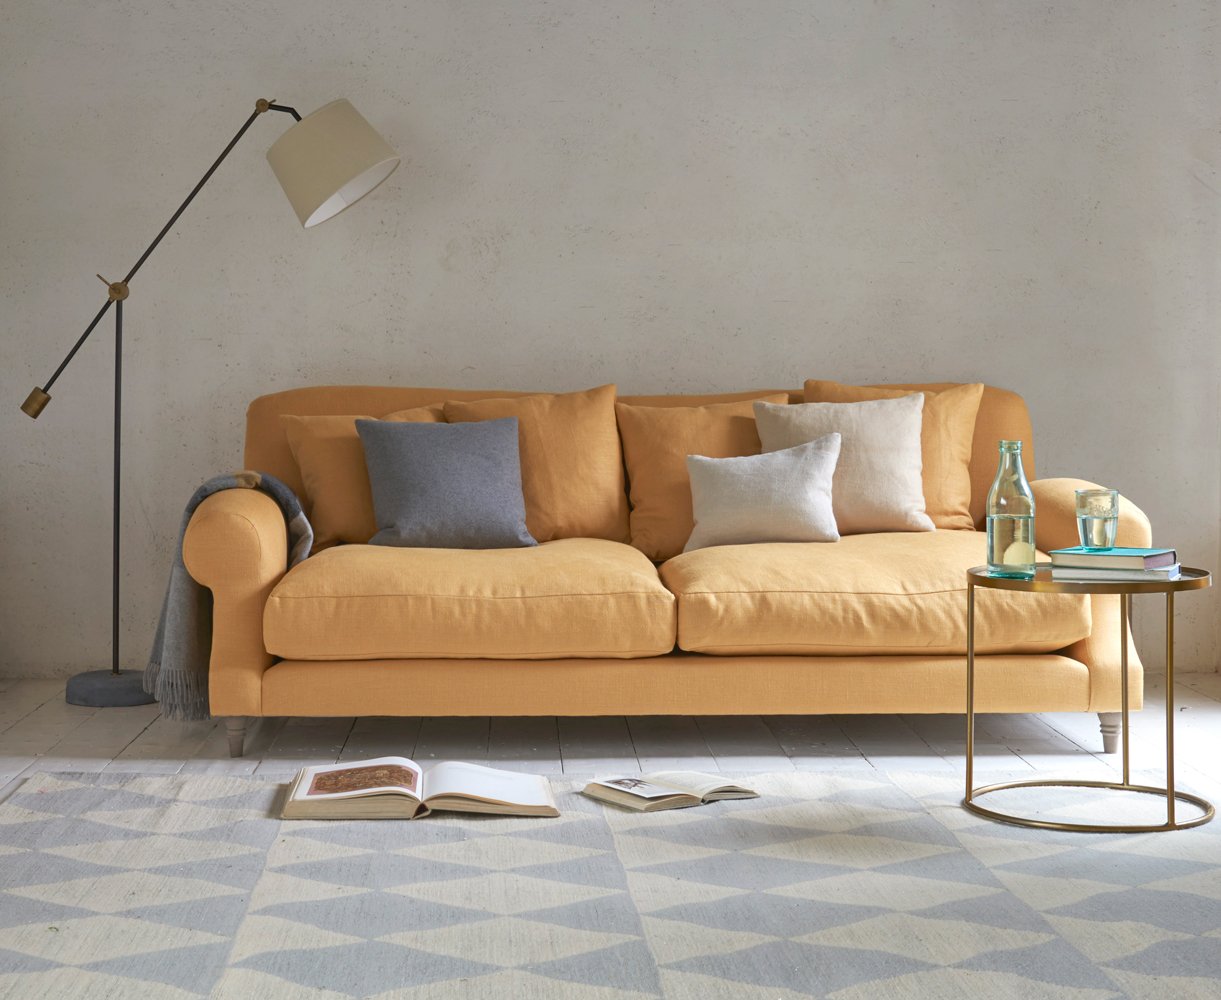 A living room with a yellow sofa and a grey rug featuring trade furniture.